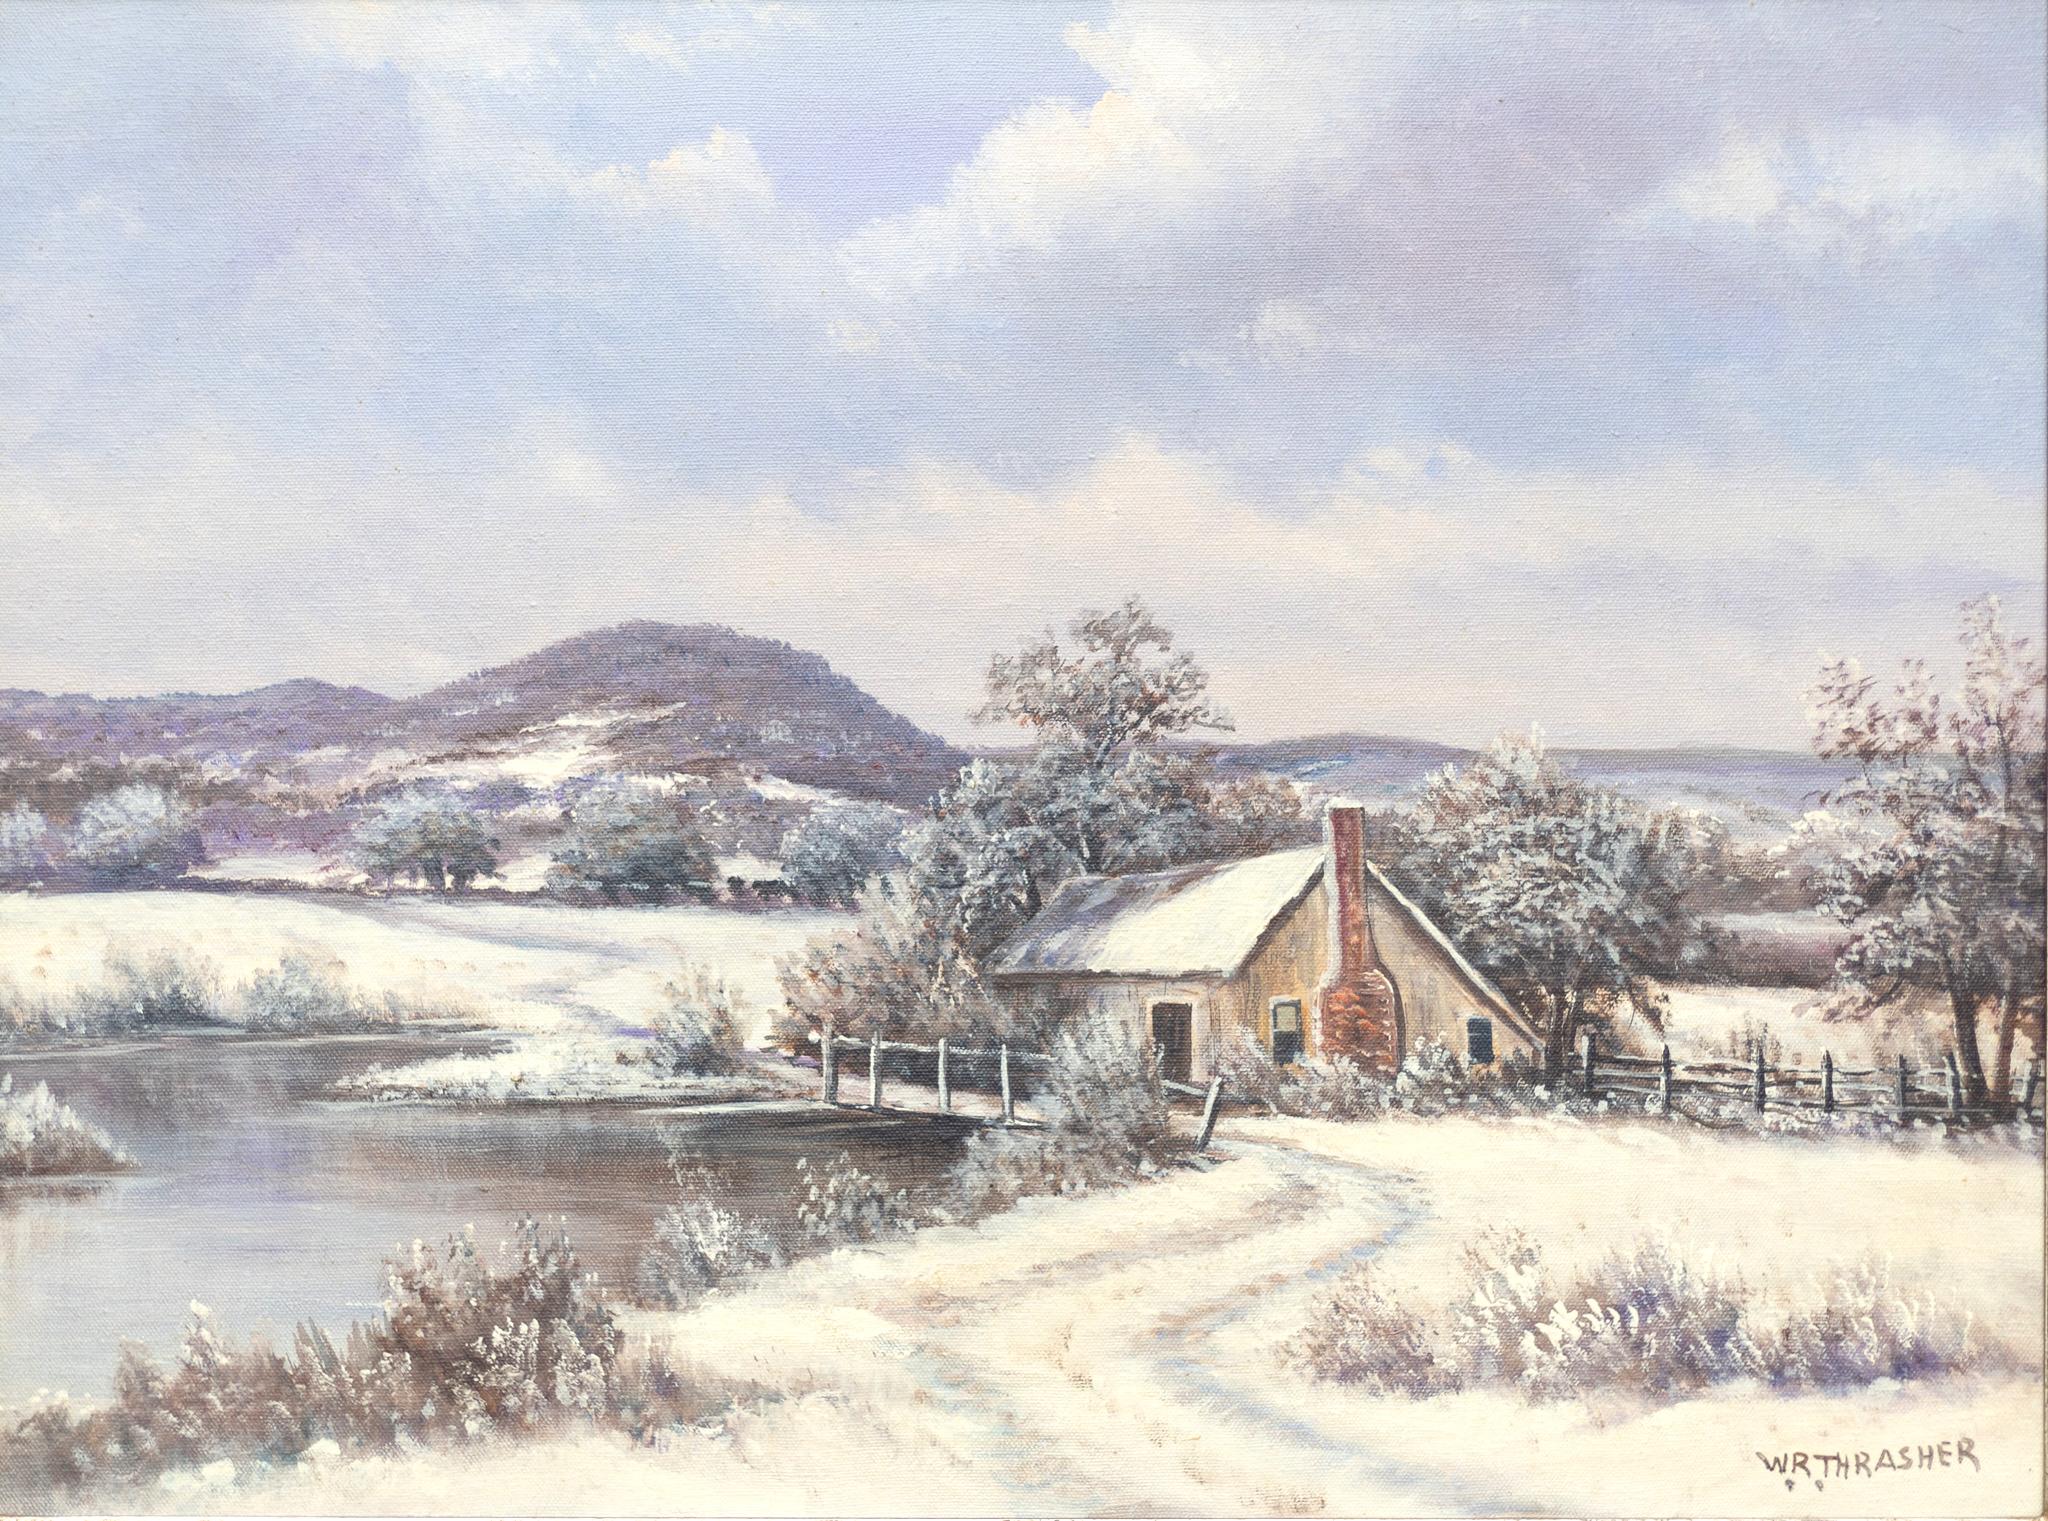 William Thrasher Landscape Painting - "Winter Landscape with Cabin" Nature Western Snow Holiday Hills Mountains Pond